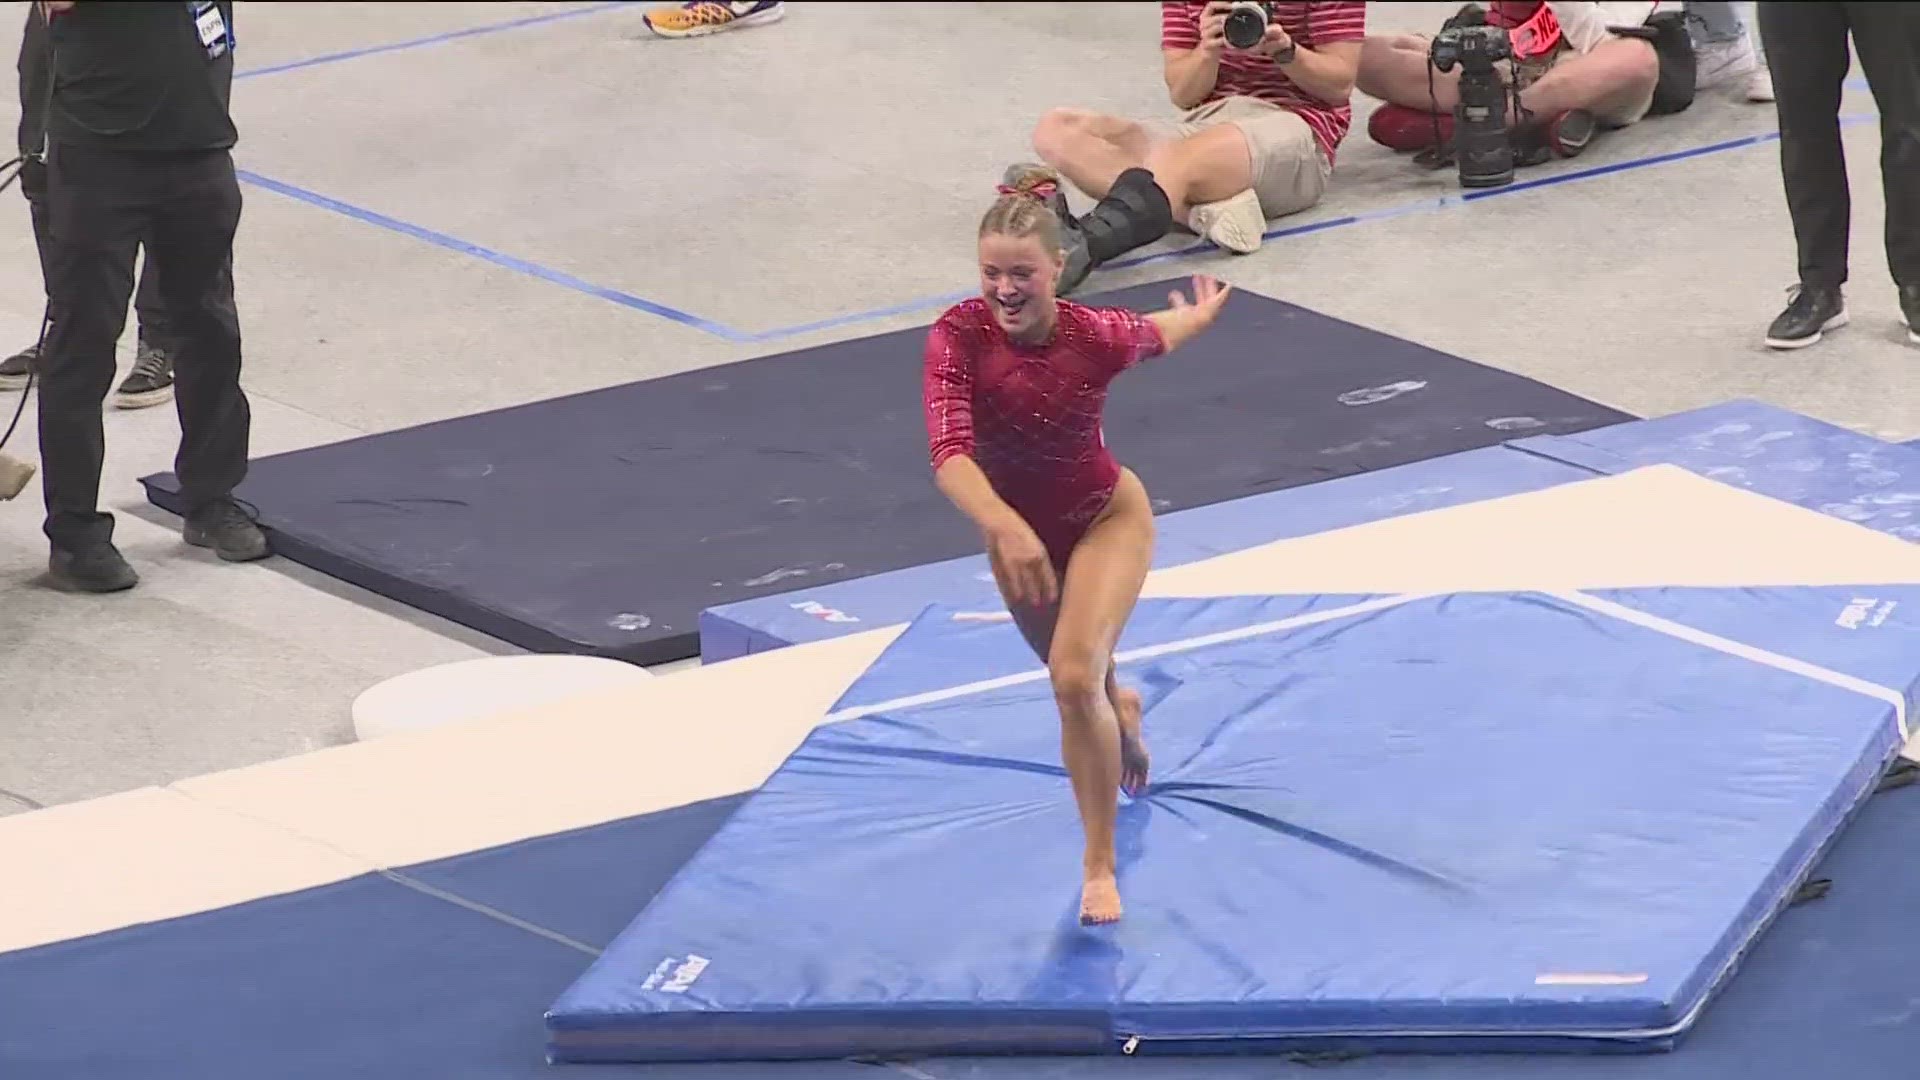 Arkansas gymnastics punched their ticket to the national championships in Fort Worth, TX.